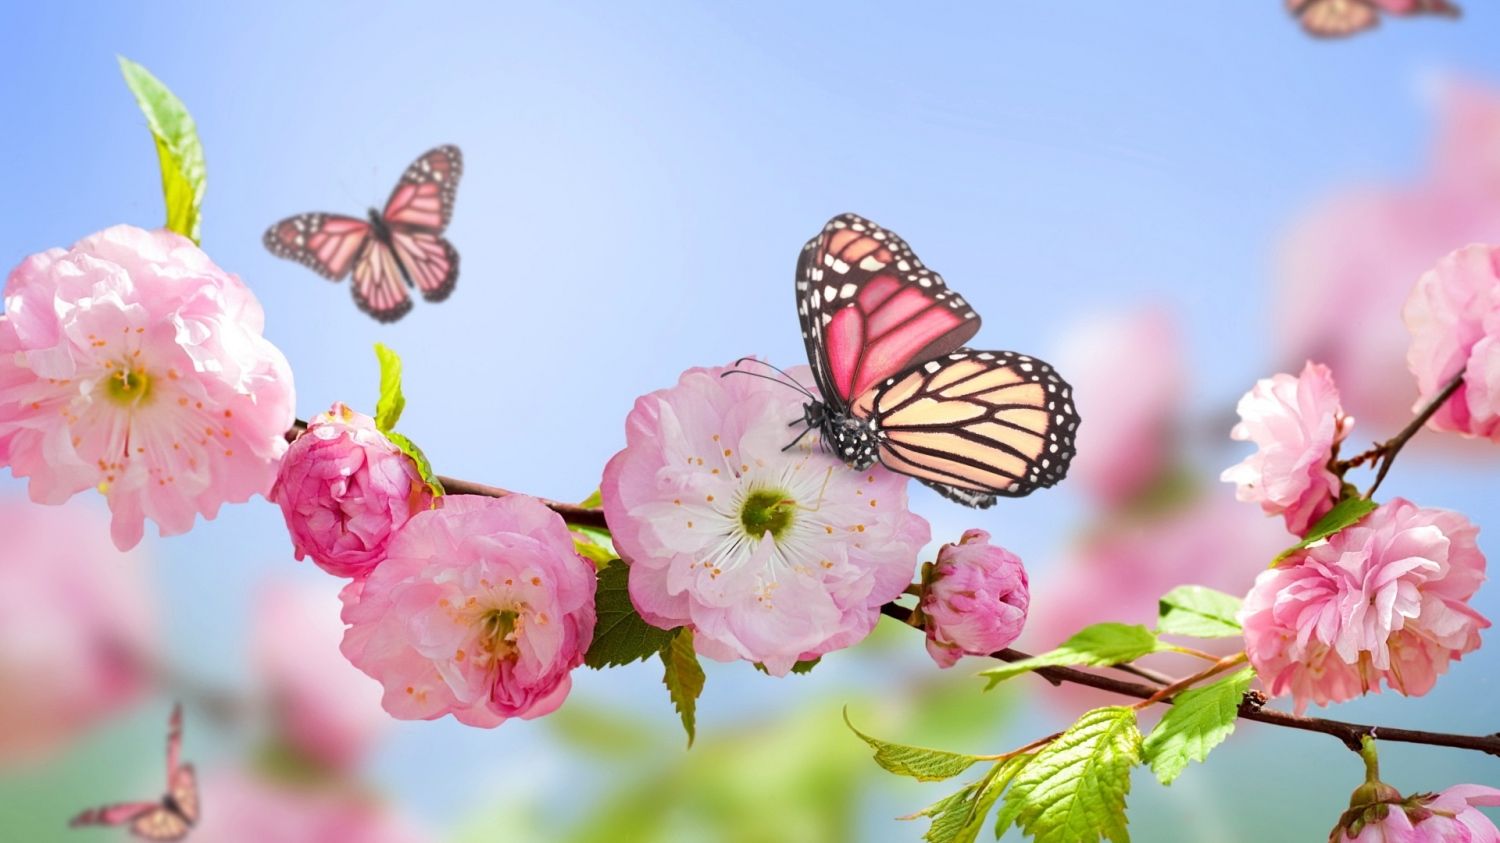 Pink Flowers Blooms and Butterfly Wallpaper | Flower Meanings ...